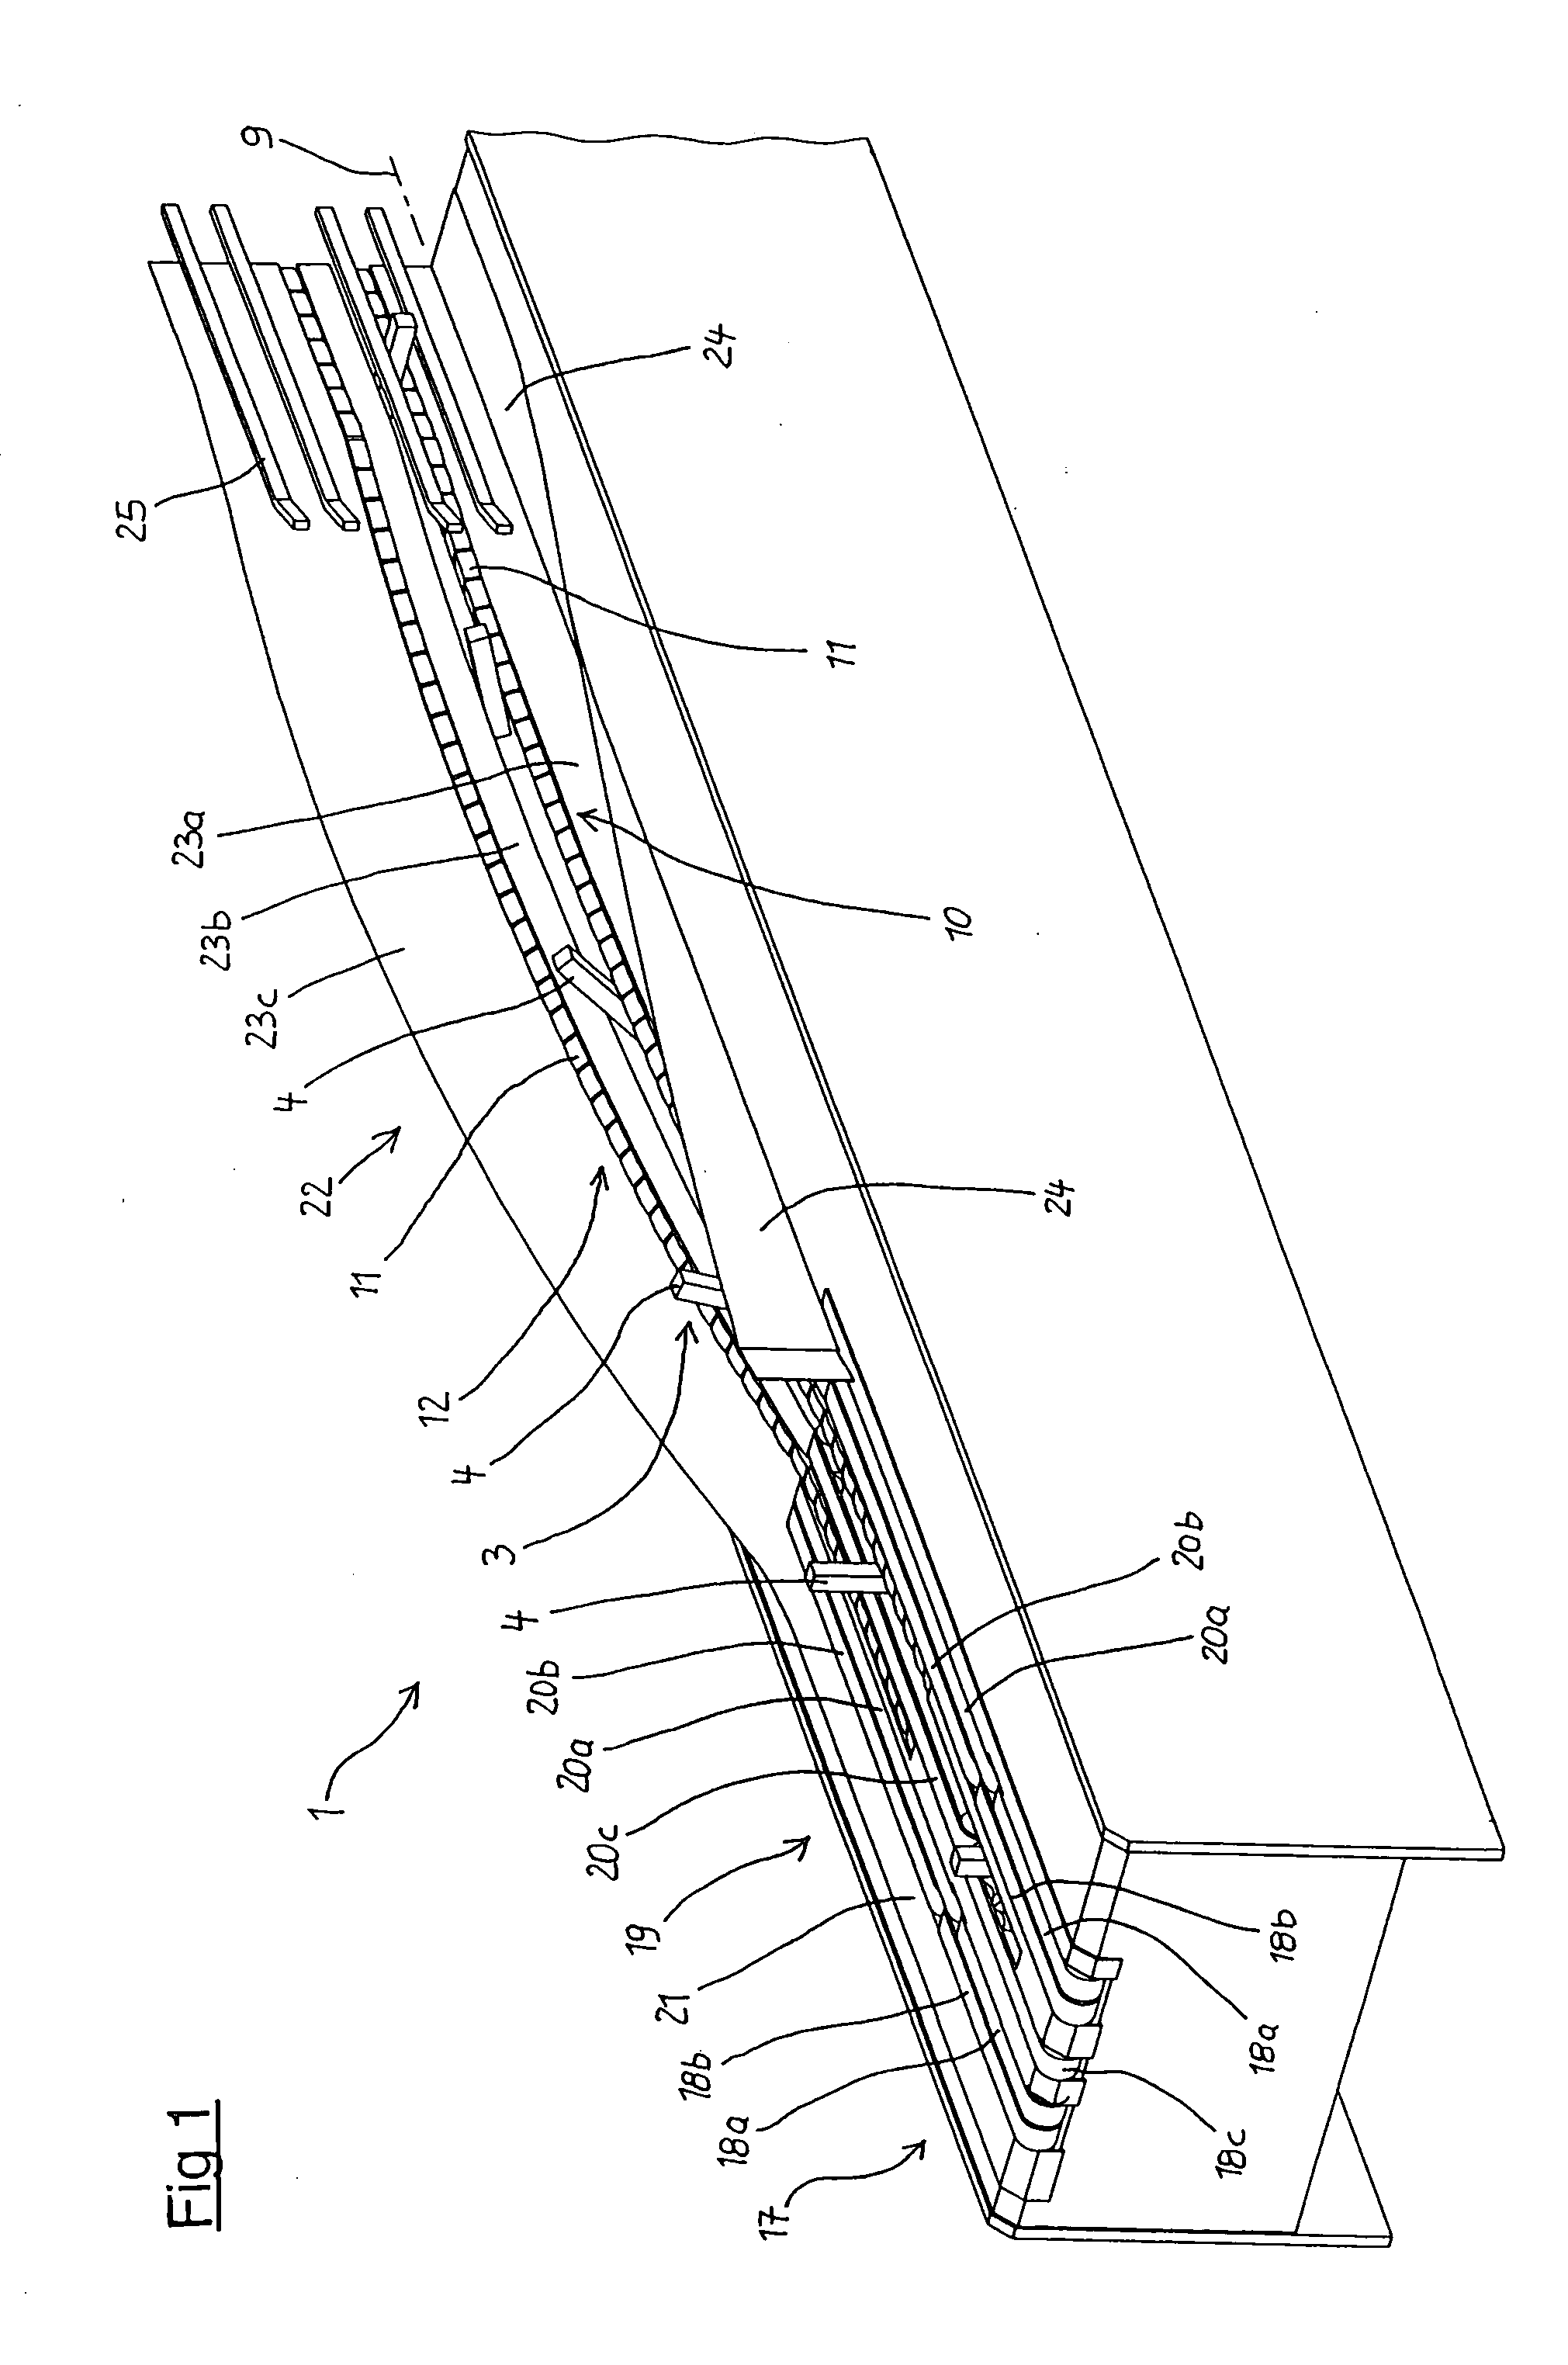 Device for transferring continuously transported printing products from a flat lying position into an upright position or vice versa